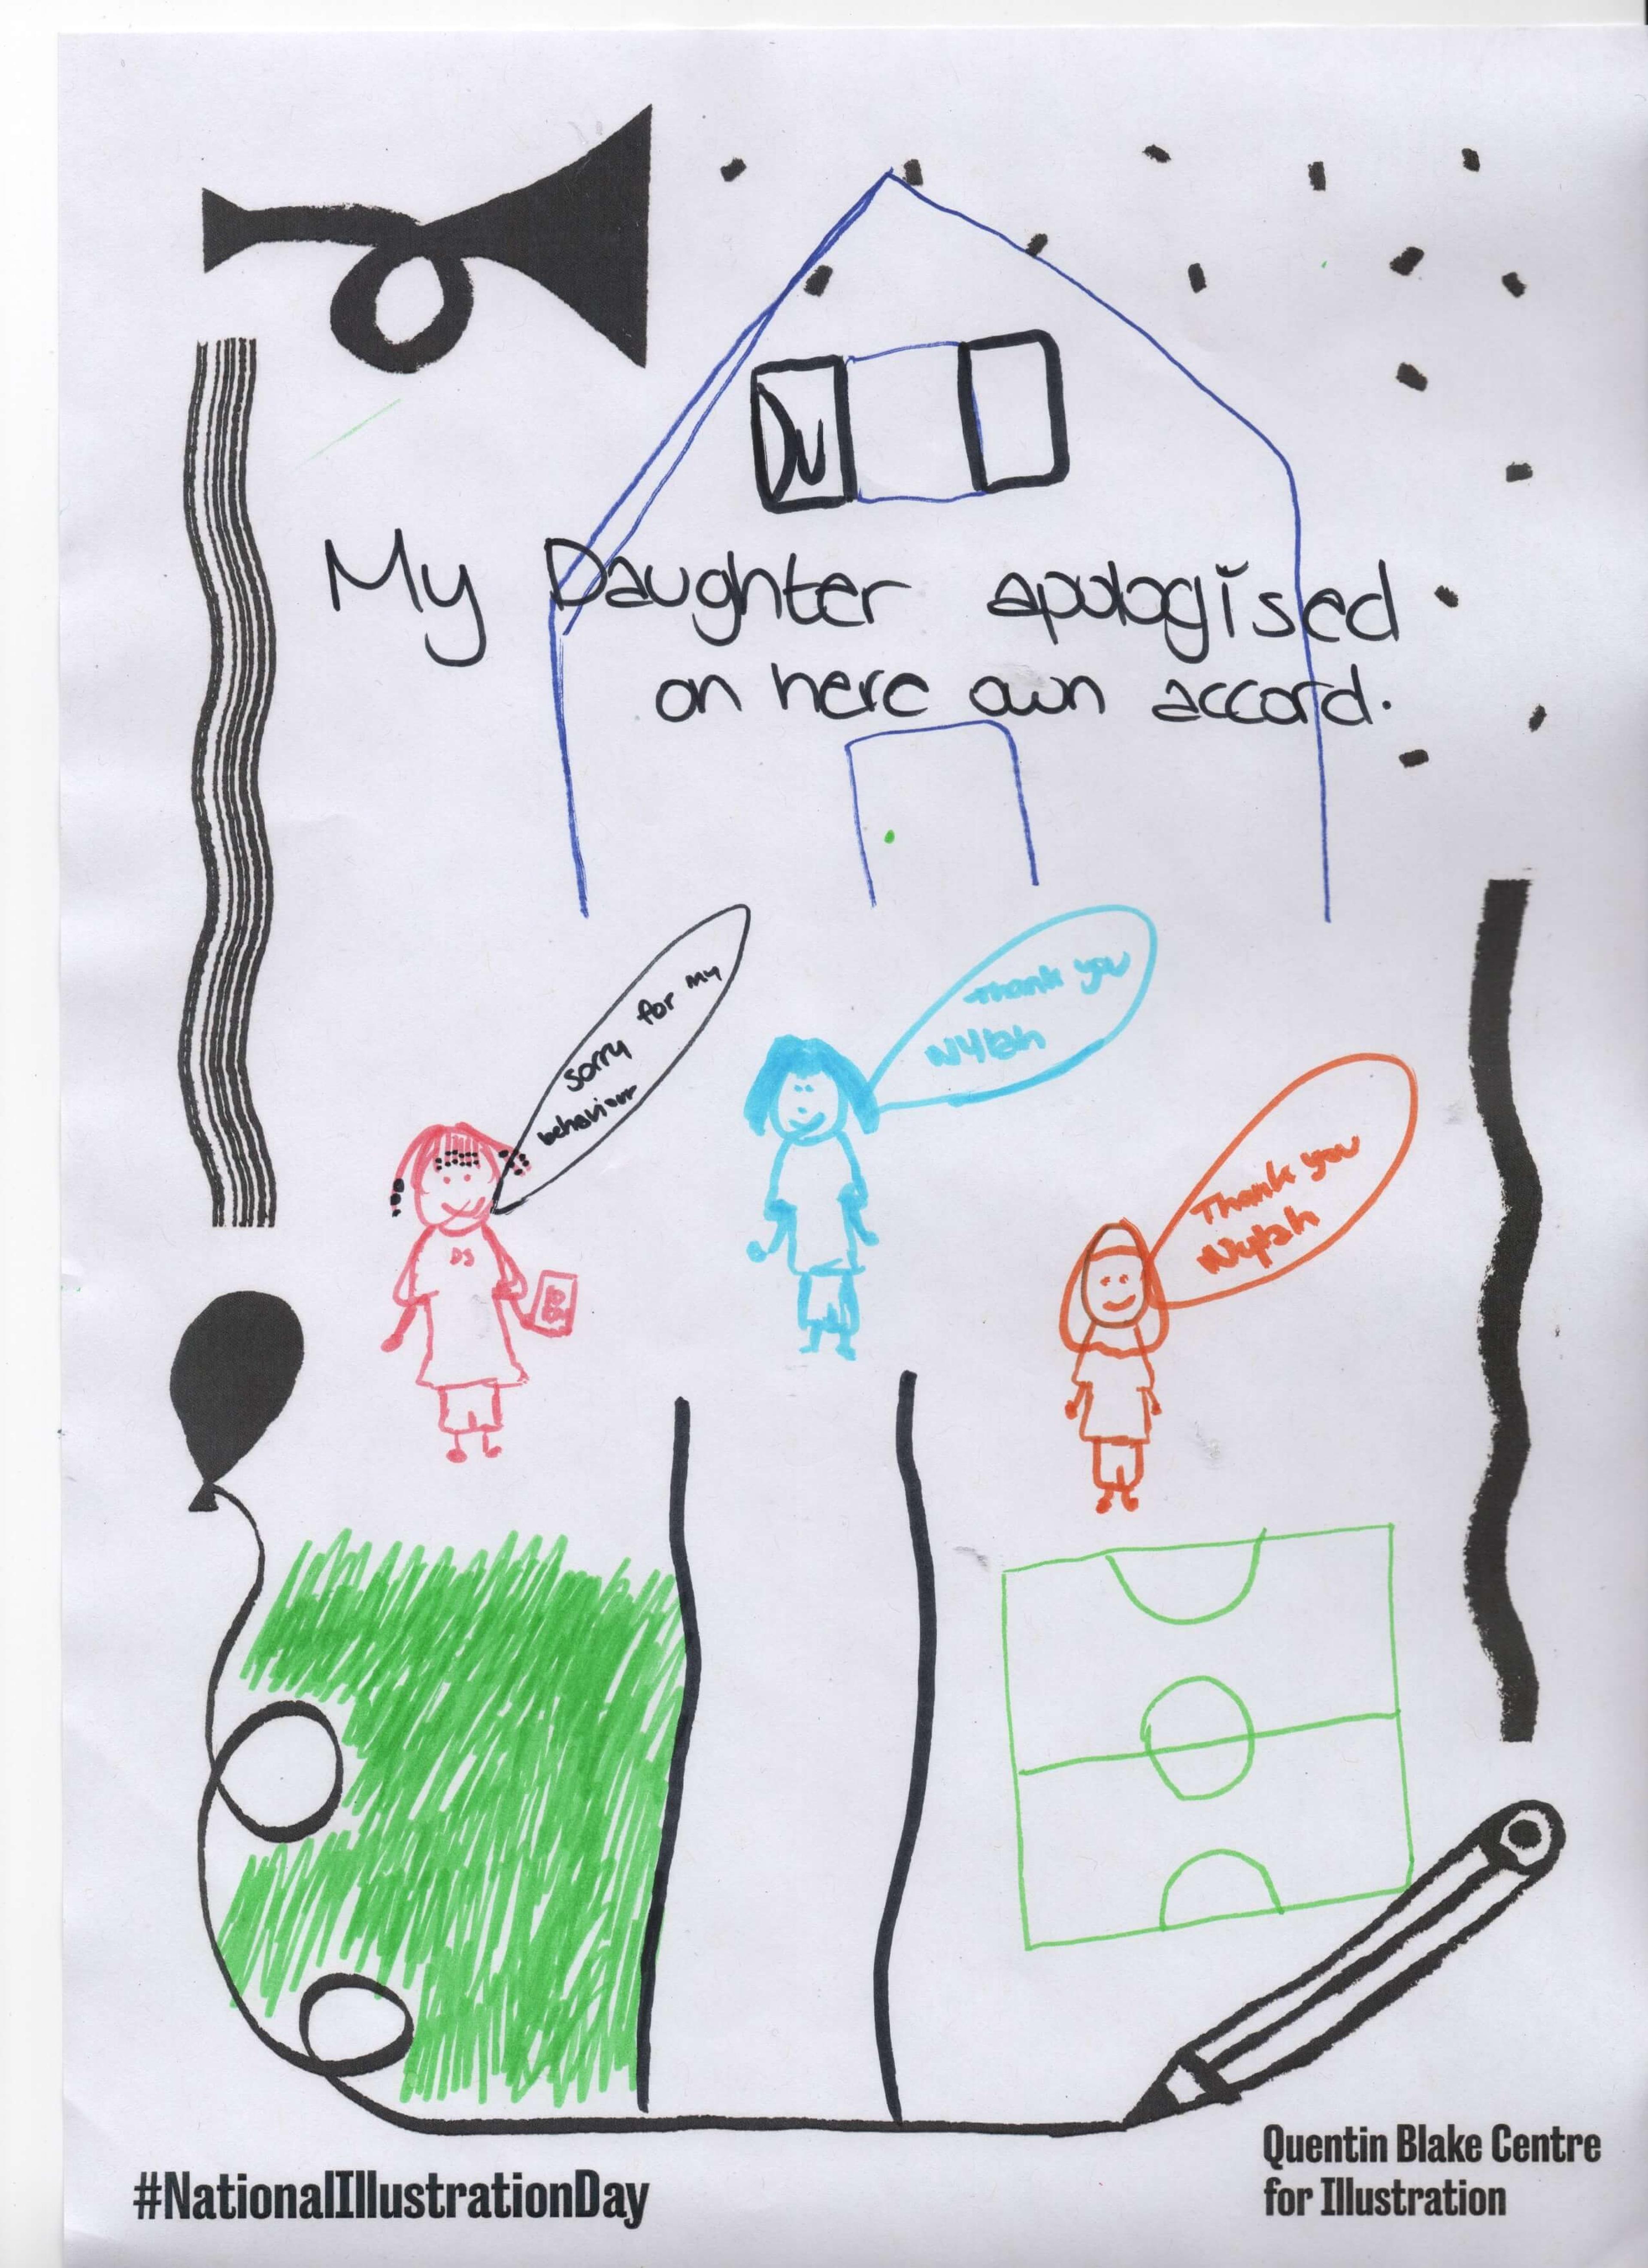 A child's drawing showing three figures standing in front of a house. The drawing includes the description text "my daughter apologised on her own accord." There are speech bubbles linked to each figure with the words "Sorry for my behaviour" and "thank you Nyah".